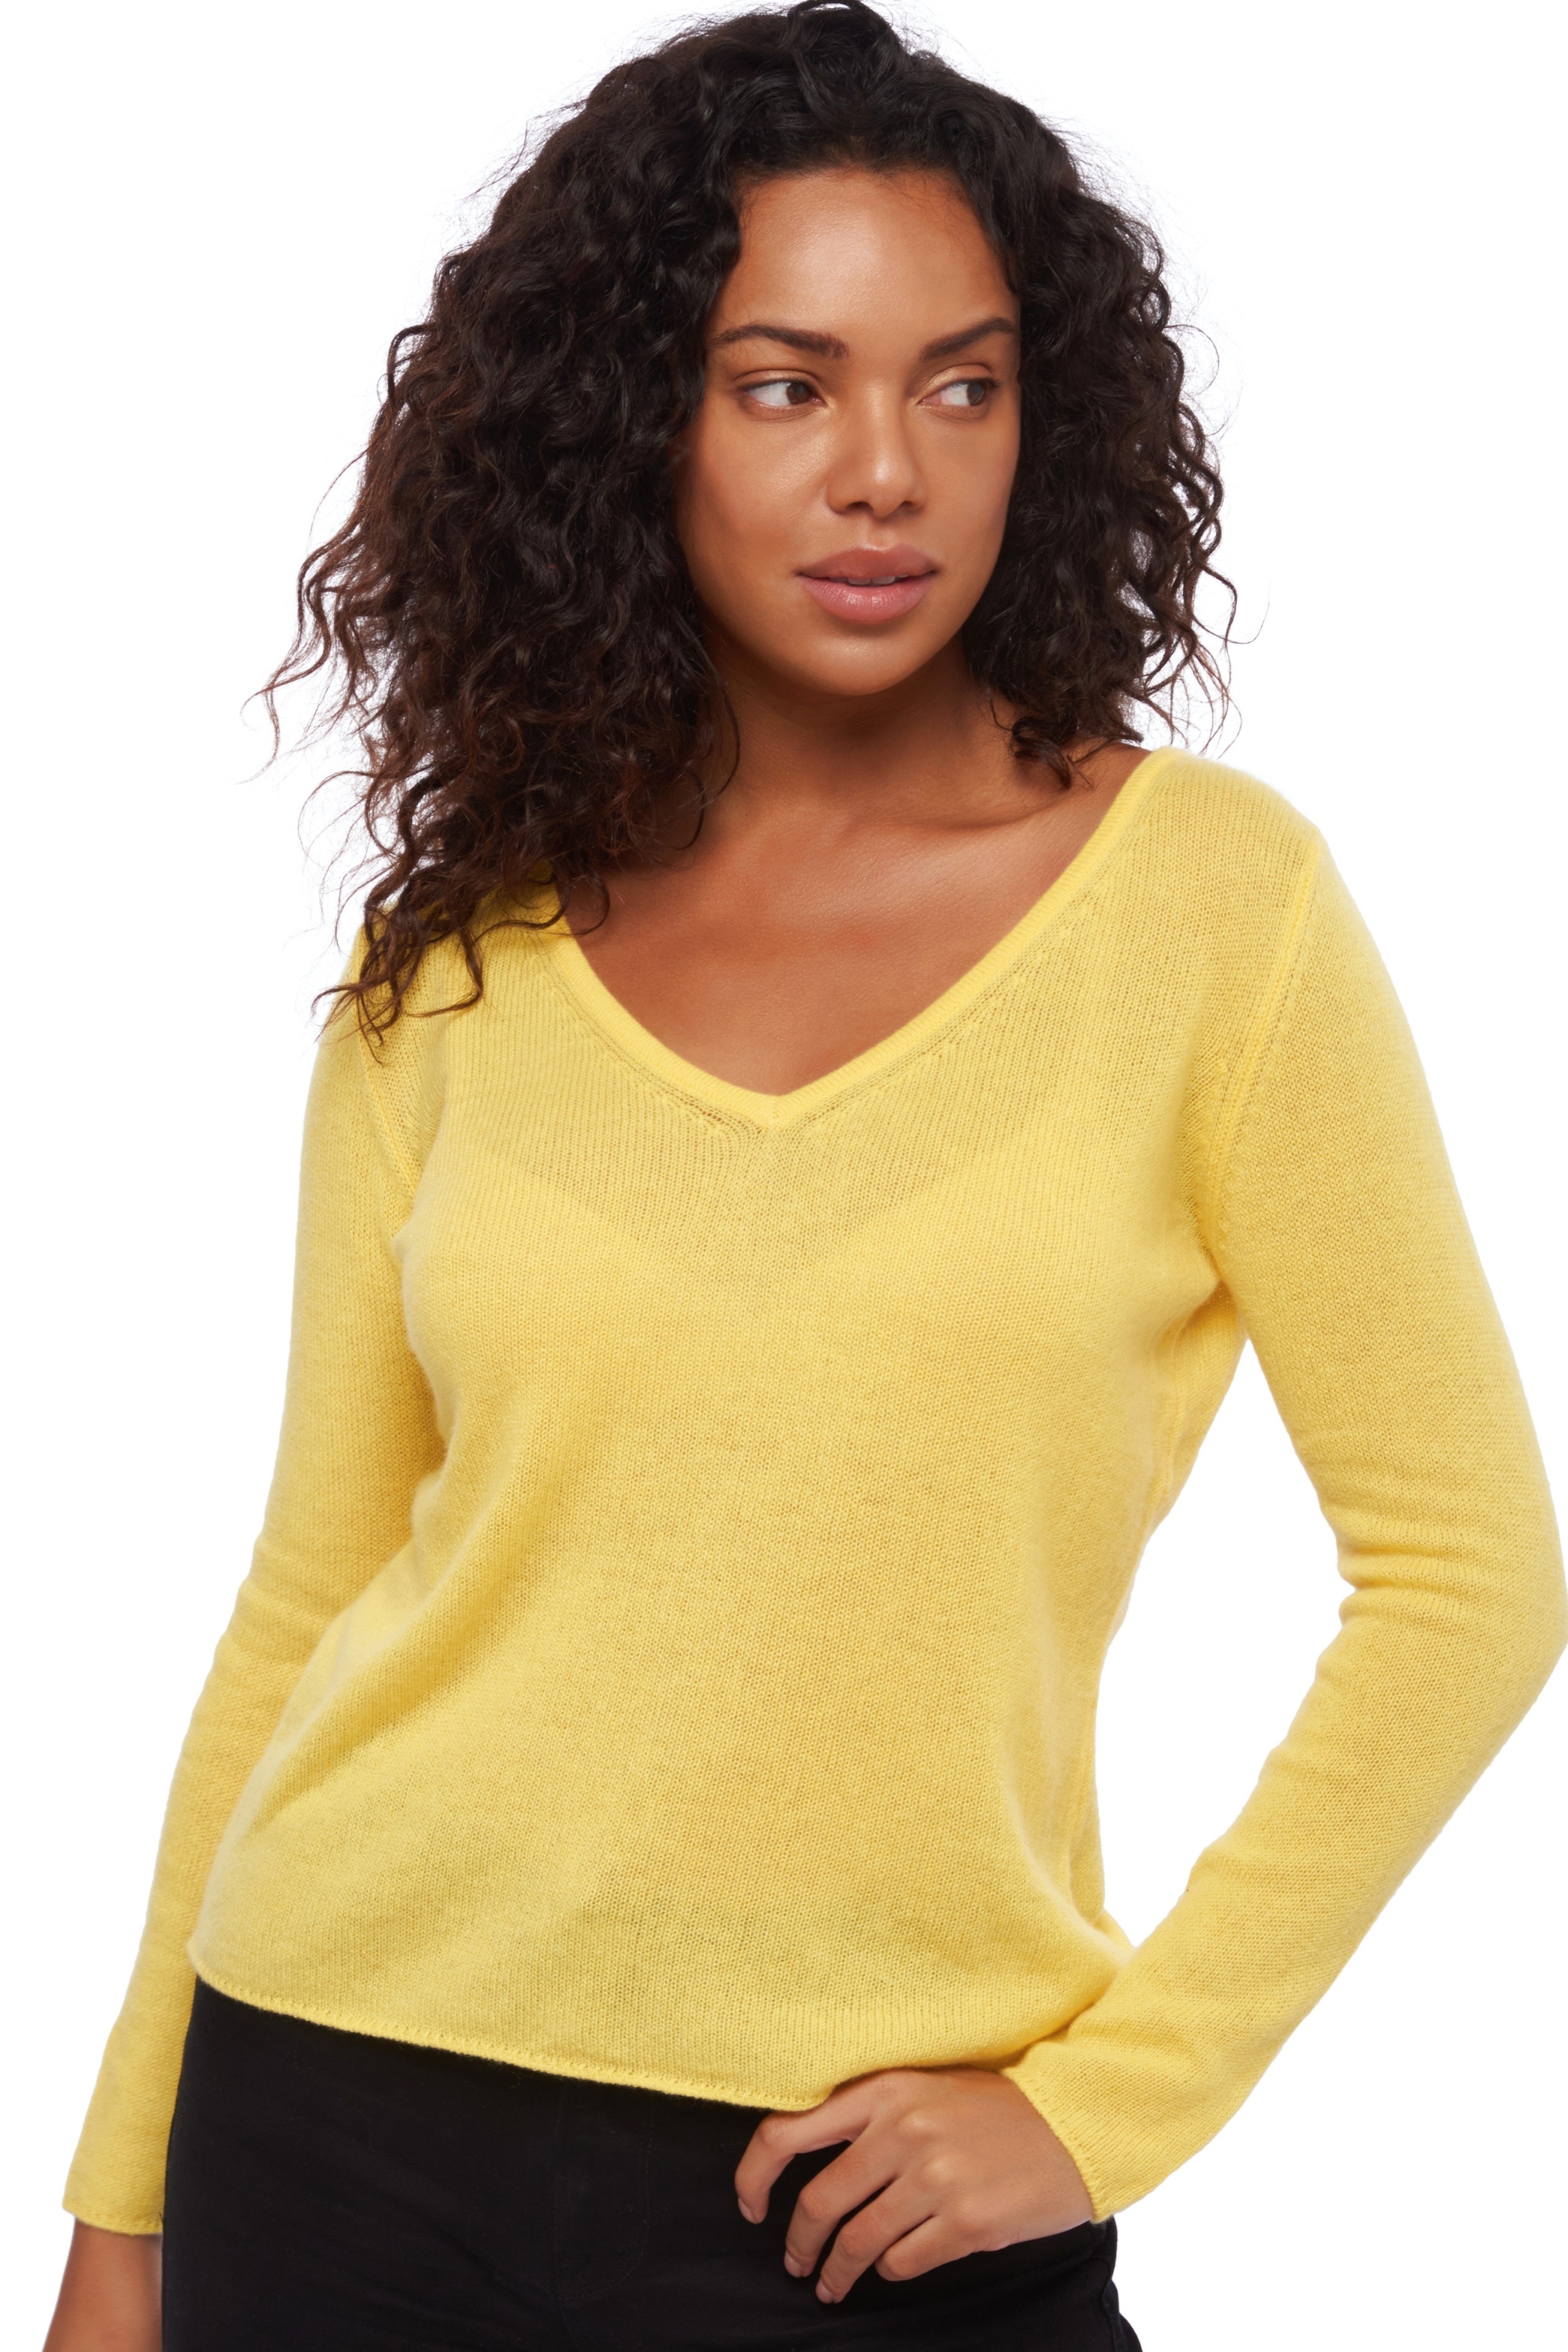 Cashmere ladies basic sweaters at low prices flavie cyber yellow s